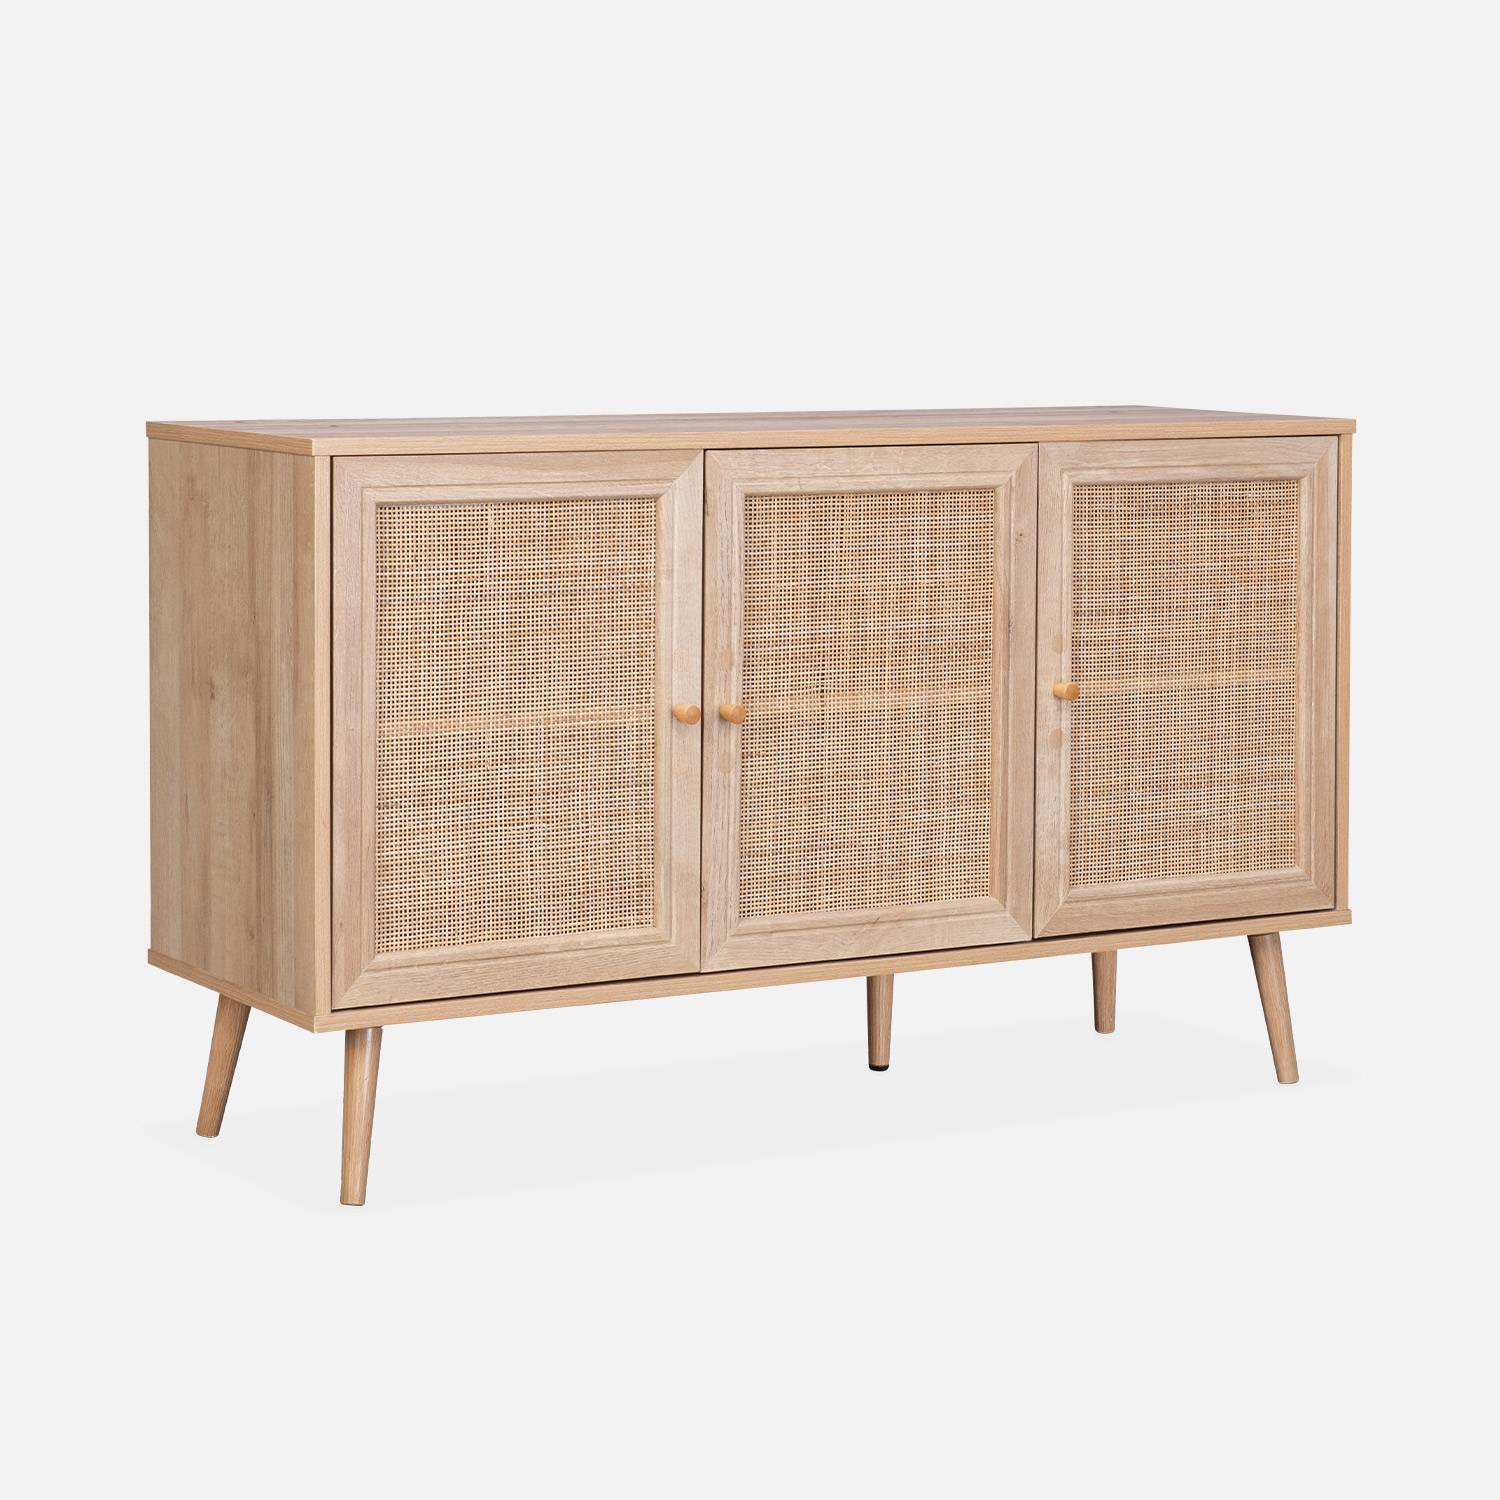 Wooden and cane rattan detail sideboard with 3 doors, 2 shelves, Scandi-style legs, 120x39x70cm - Boheme - Natural wood colour,sweeek,Photo3